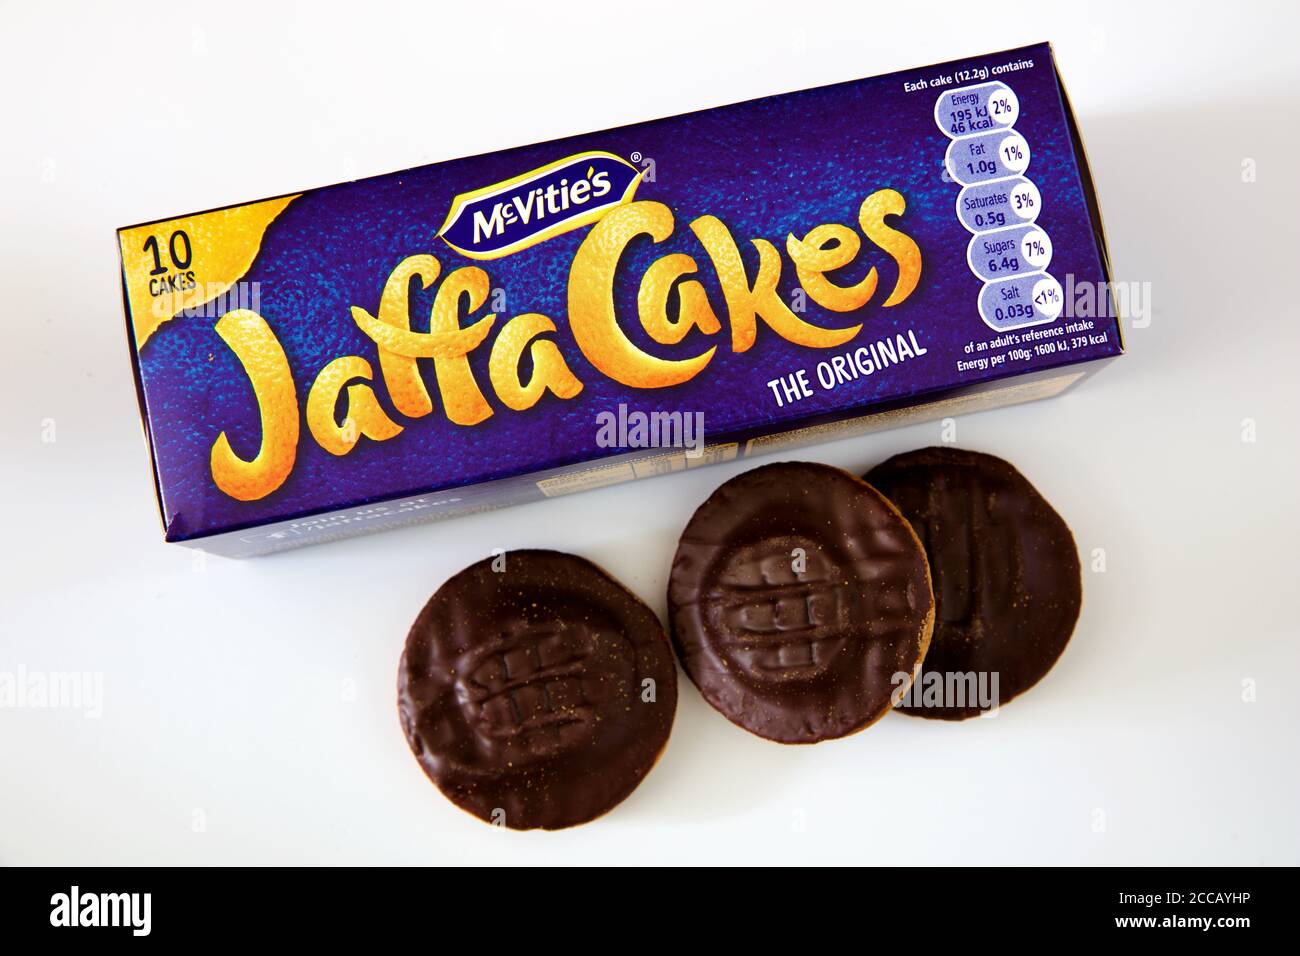 Jaffa Jonuts Are Here, But Are They Cakes Or Doughnuts? | HuffPost UK Life